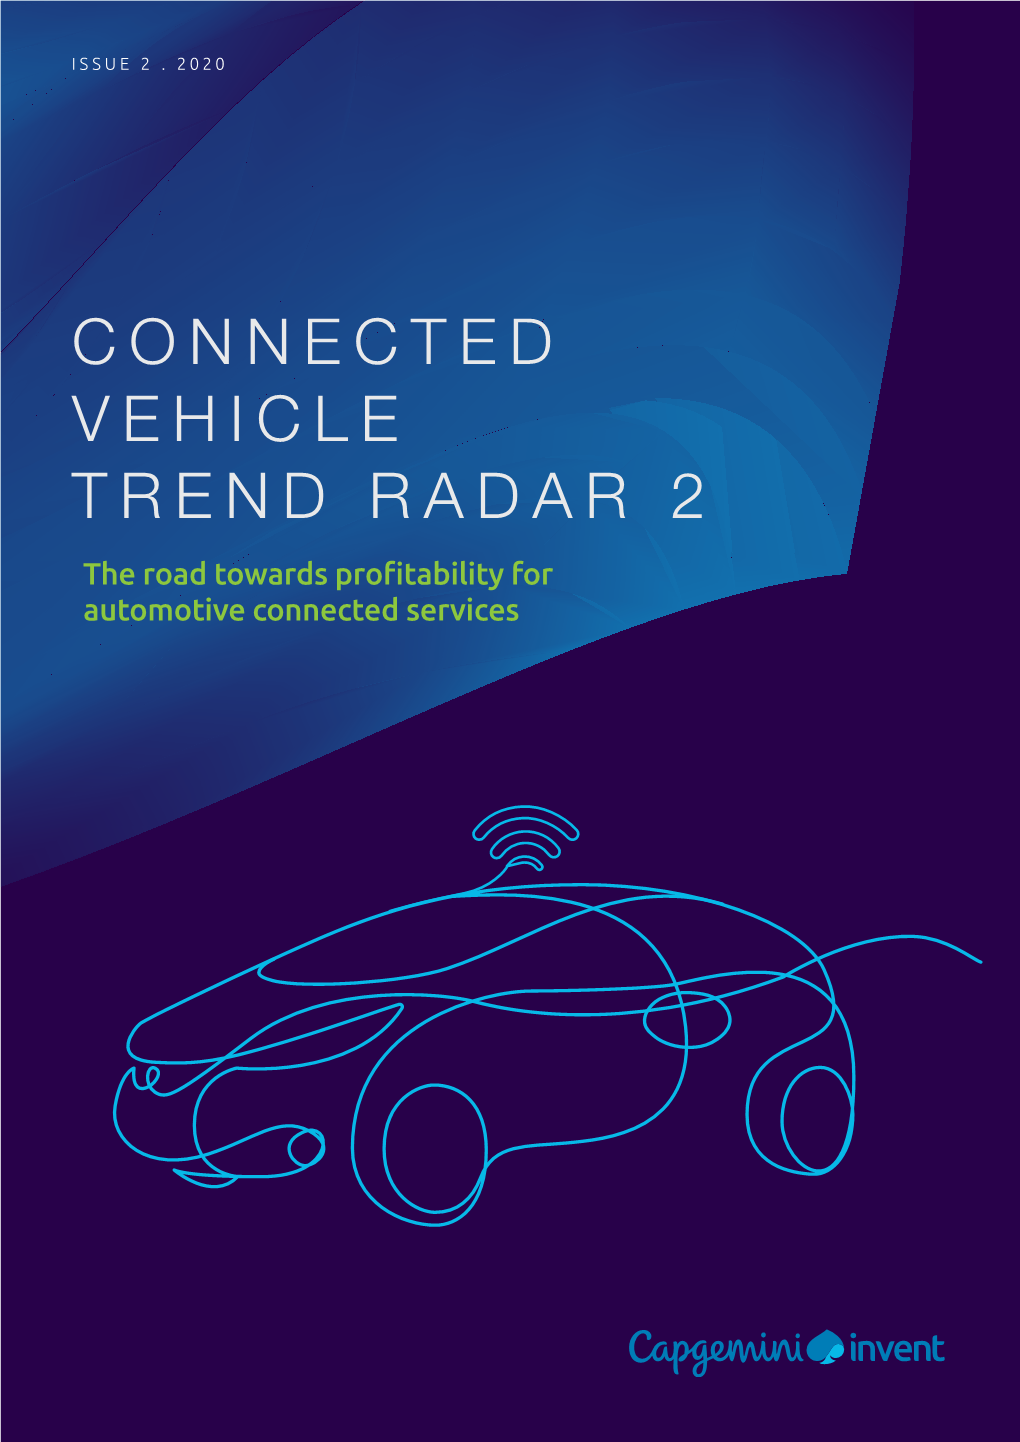 Connected Vehicle Trend Radar 2